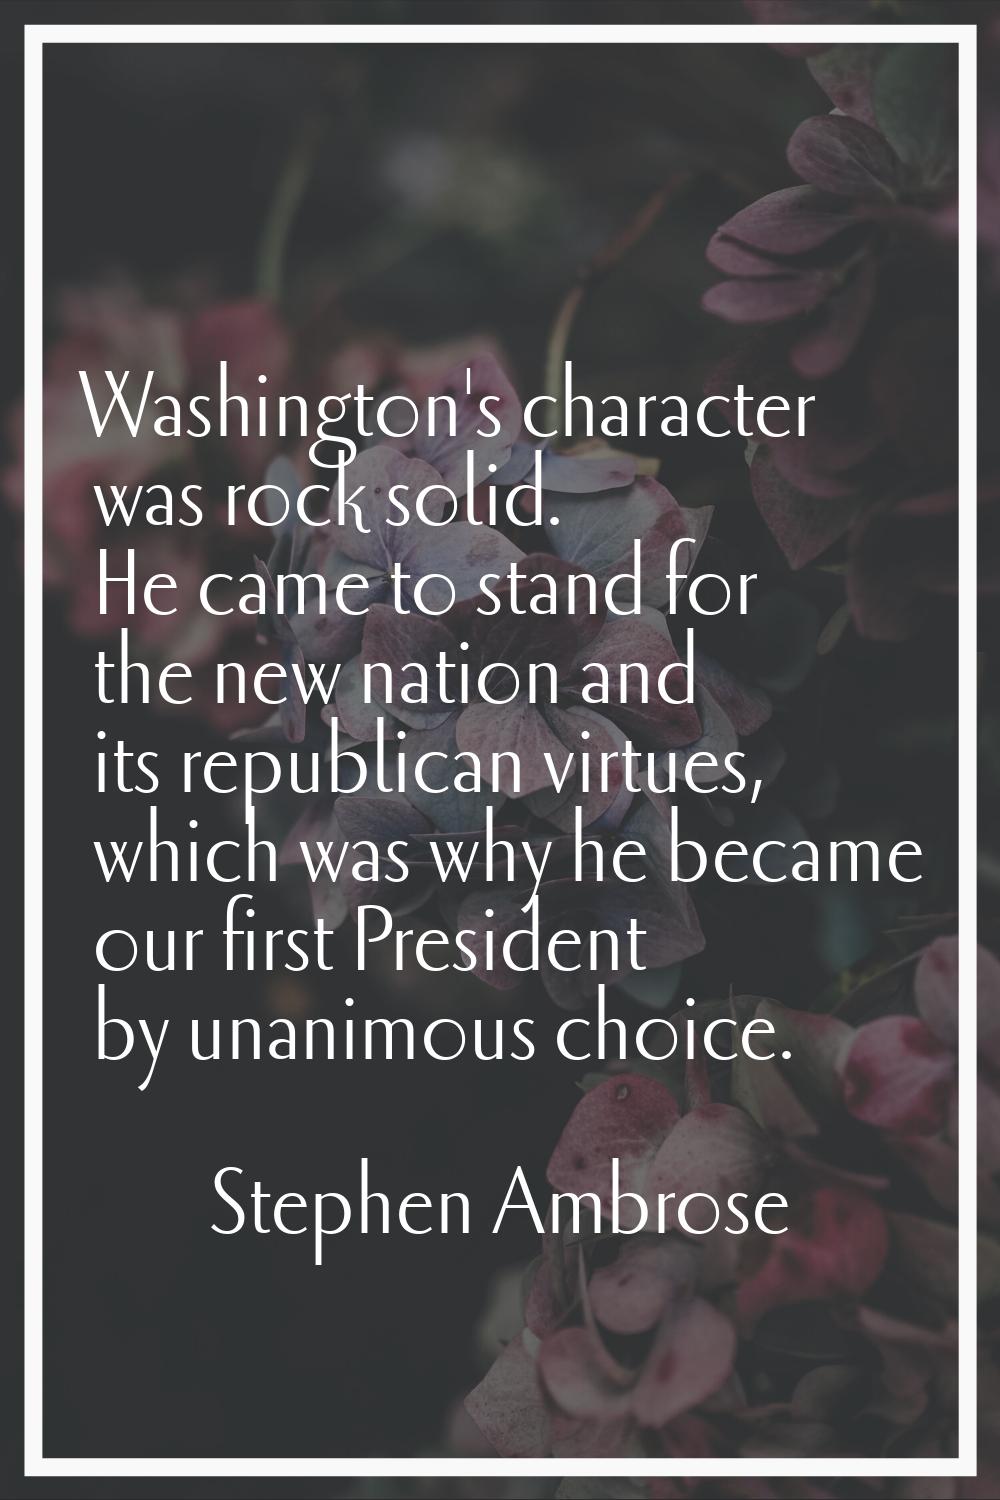 Washington's character was rock solid. He came to stand for the new nation and its republican virtu